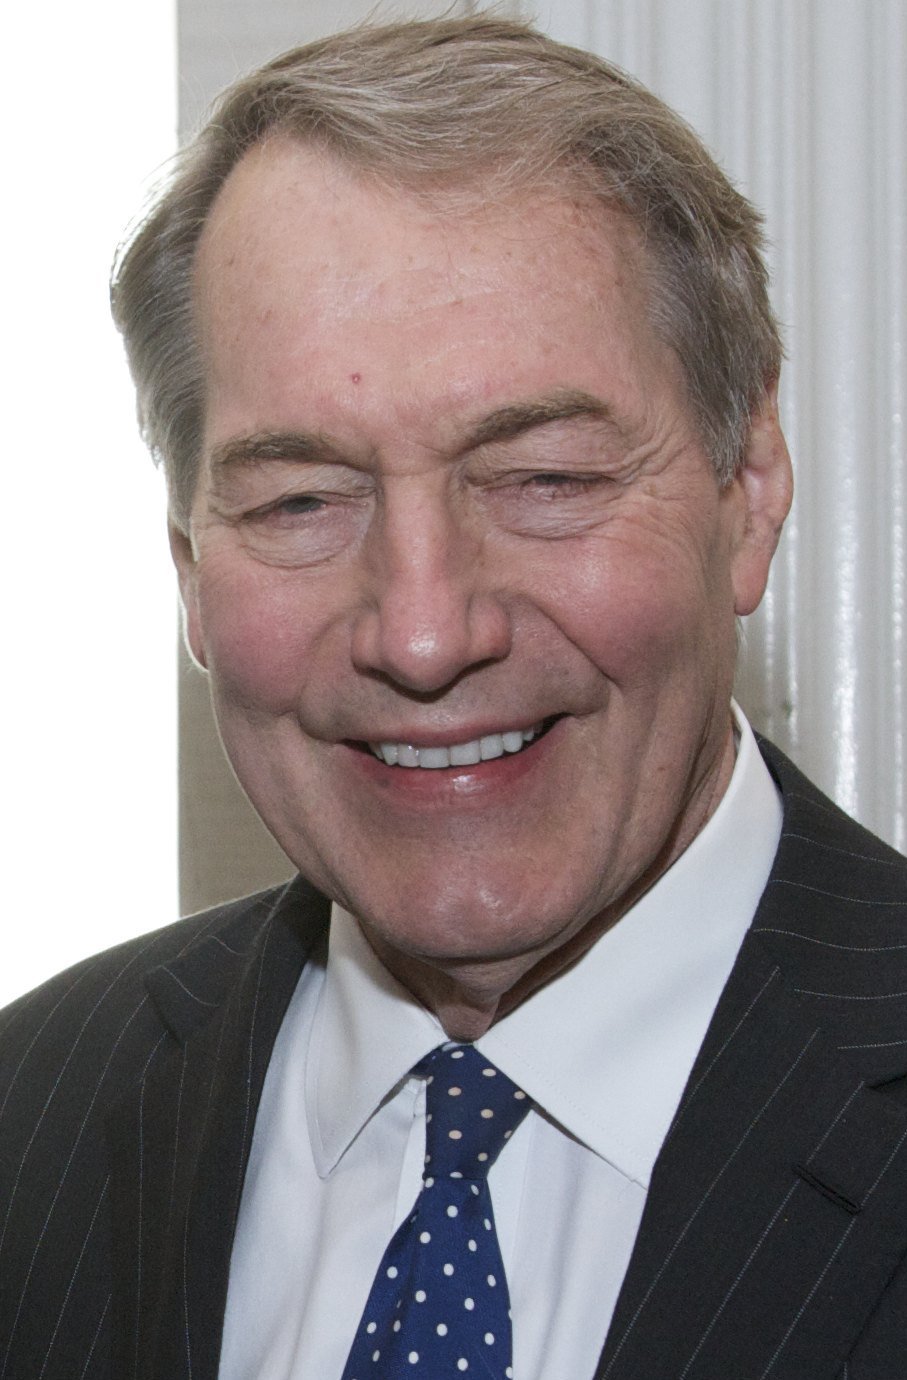 Charlie Rose at the 73rd Annual Peabody Awards. May, 2014. | Photo: Wikimedia Commons Images